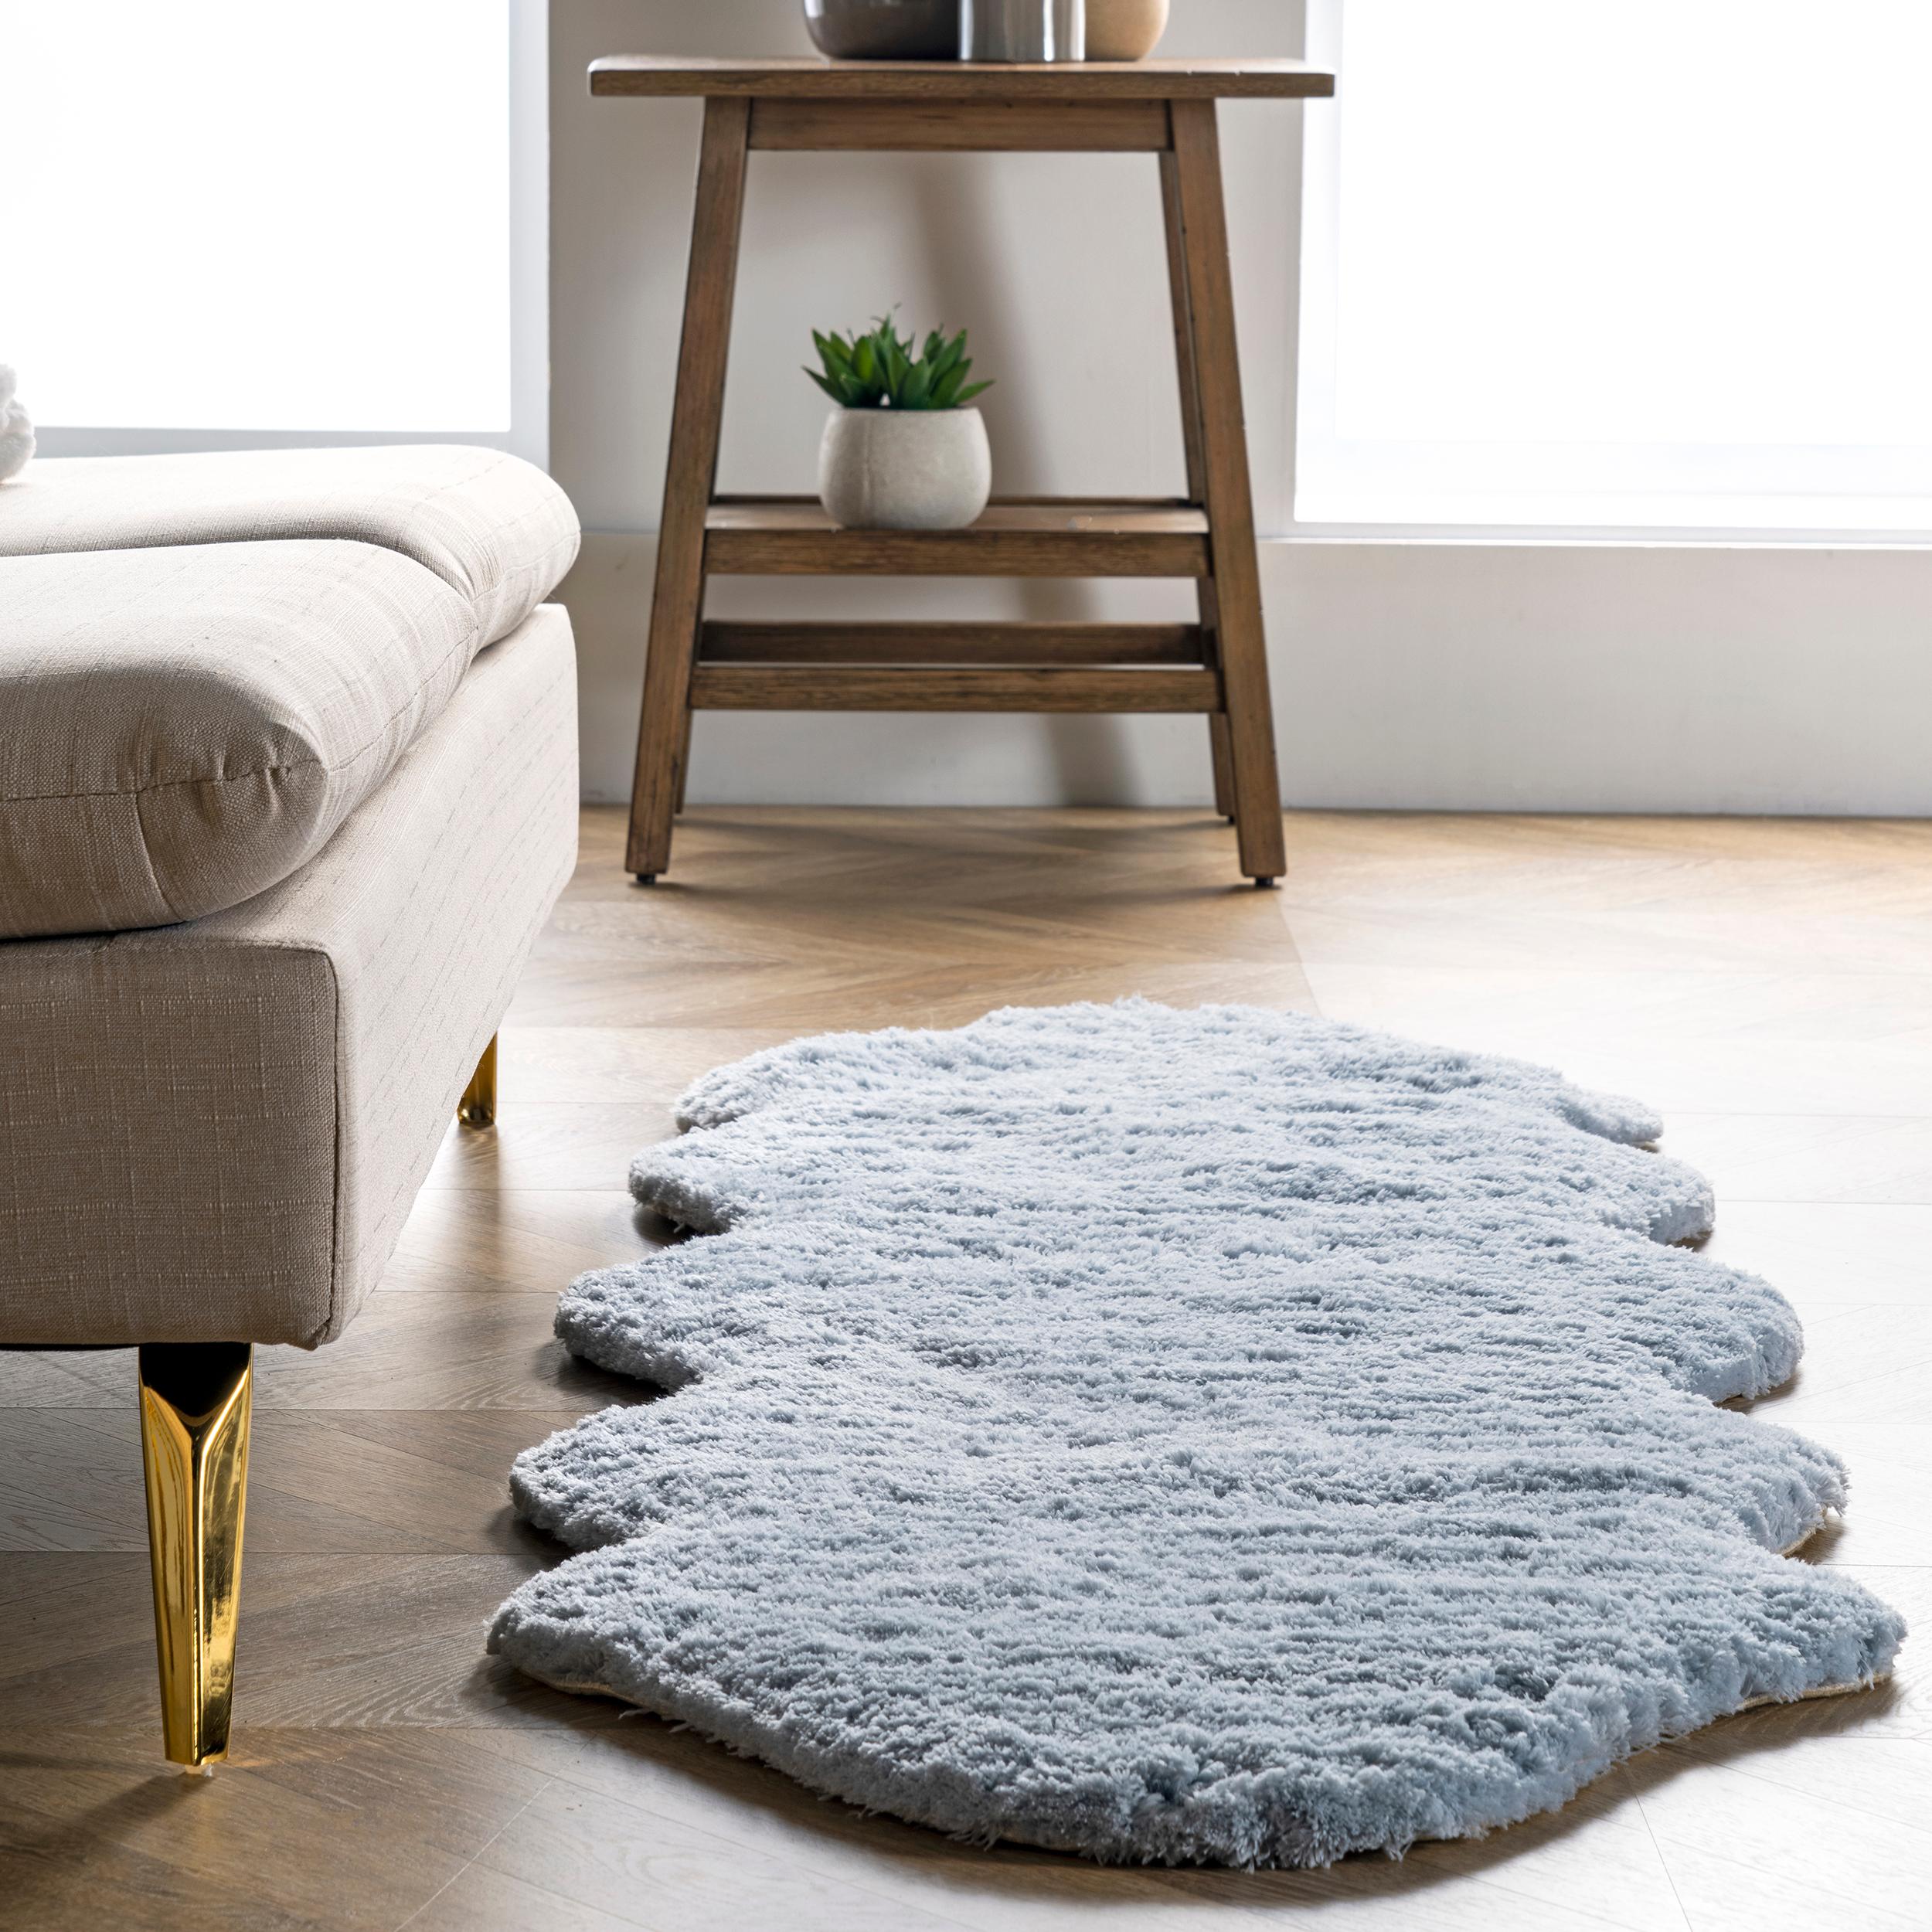 THICK Runner Rugs ROMANCE grey modern NON-slip Stairs Width 67-100cm extra long 